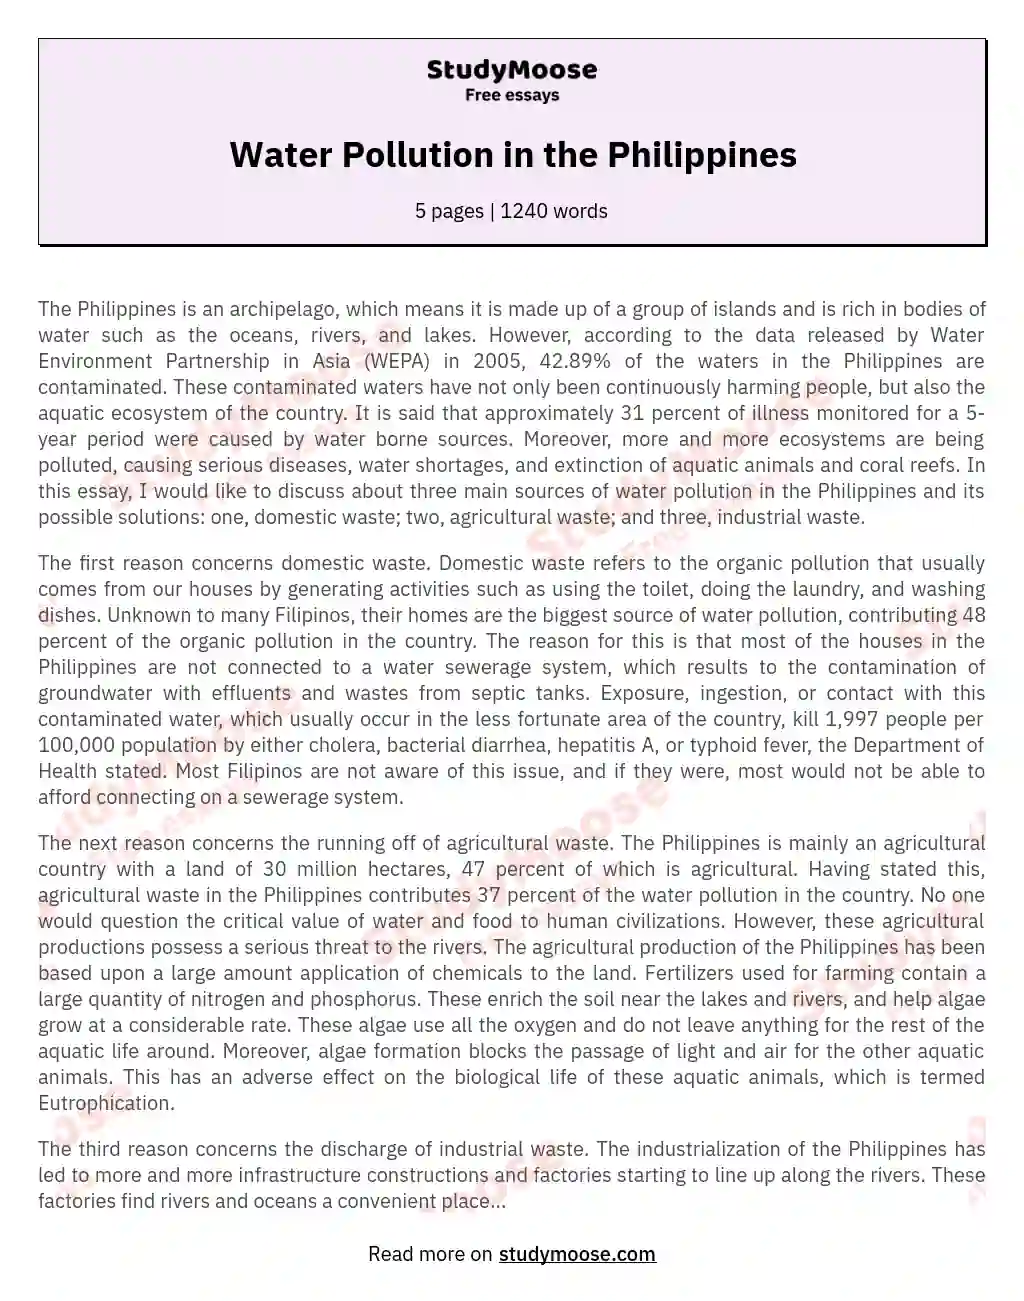 essay about water pollution in the philippines